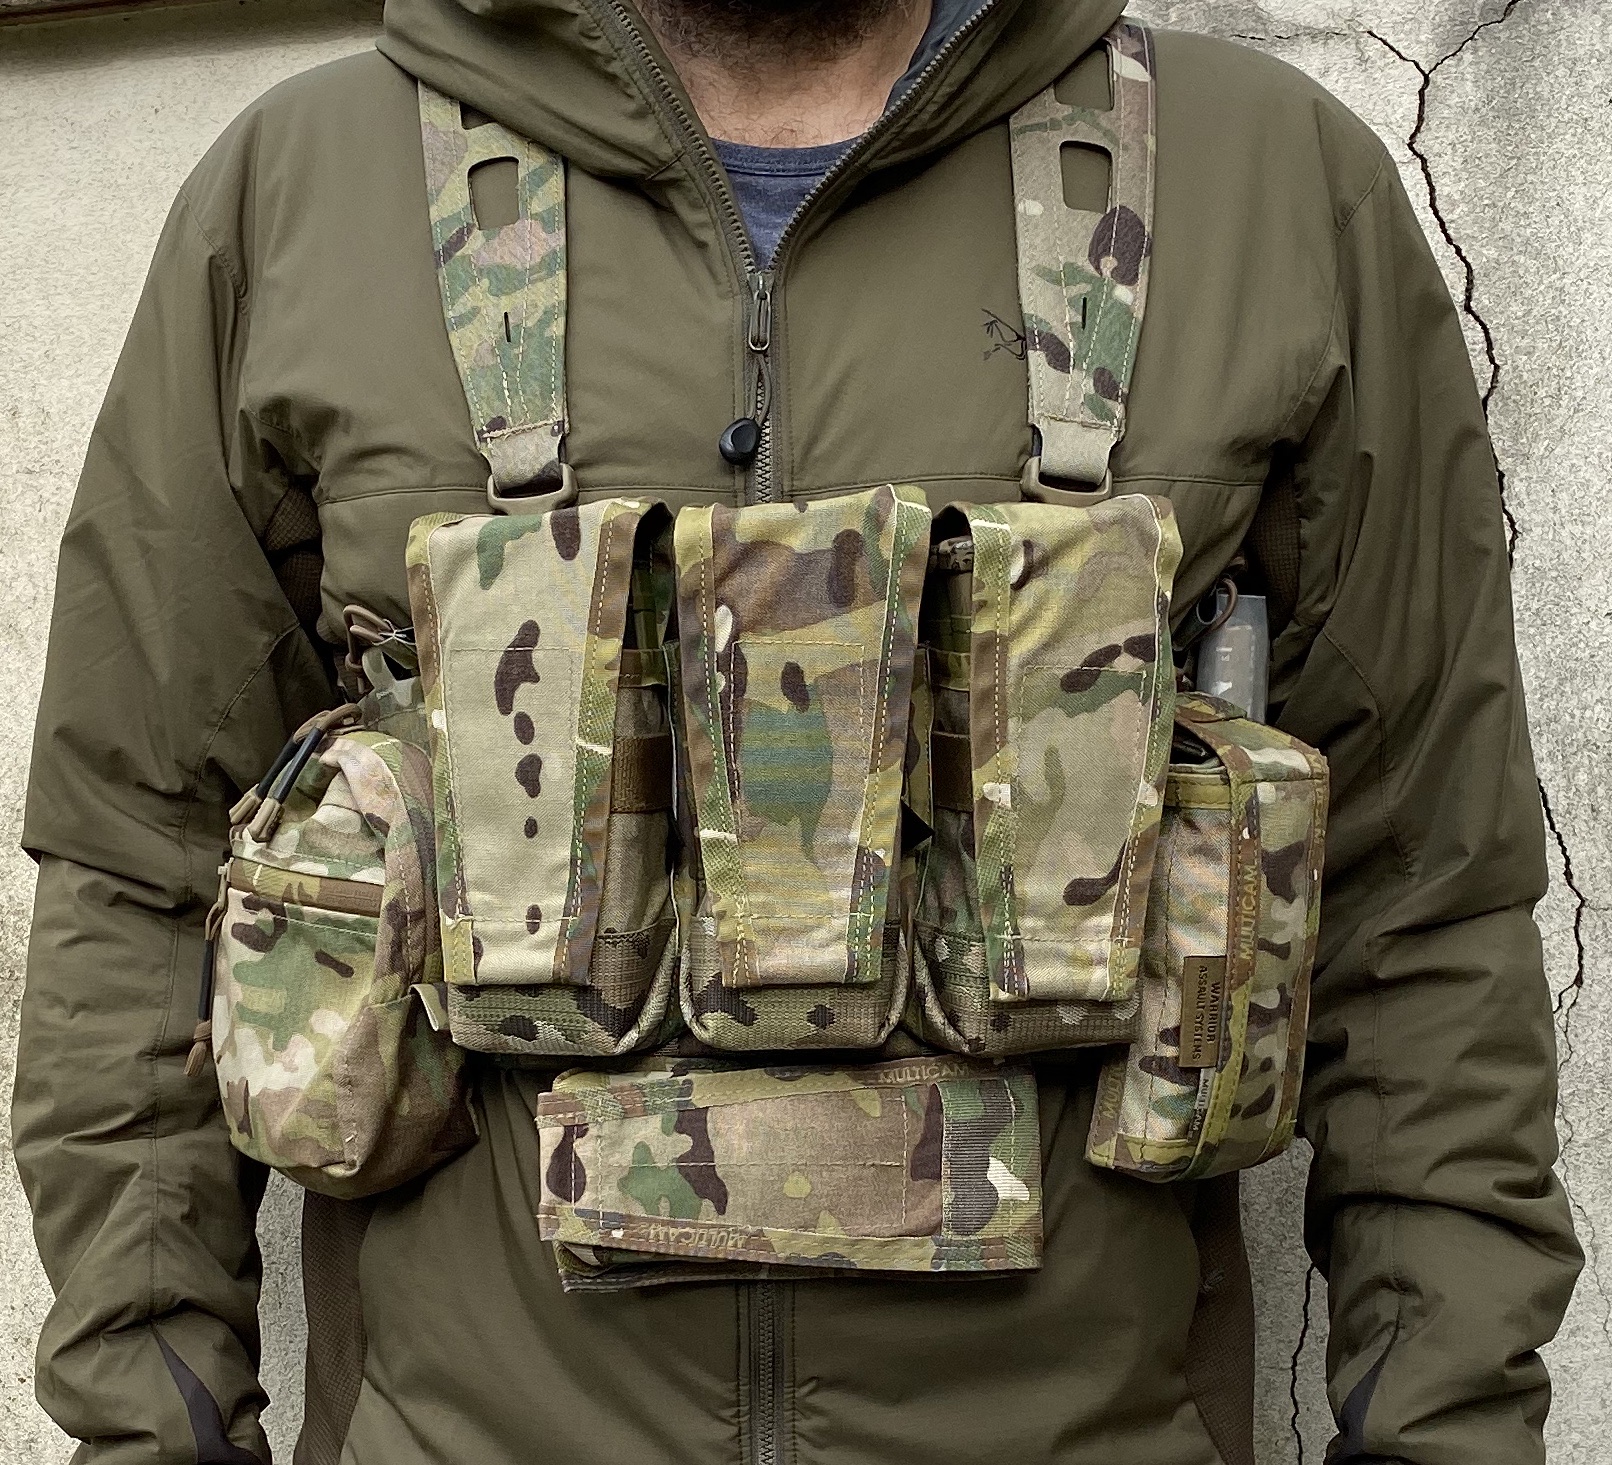 REVIEW: Crye Precision Airlite Convertible Chest Rig – Part 1 